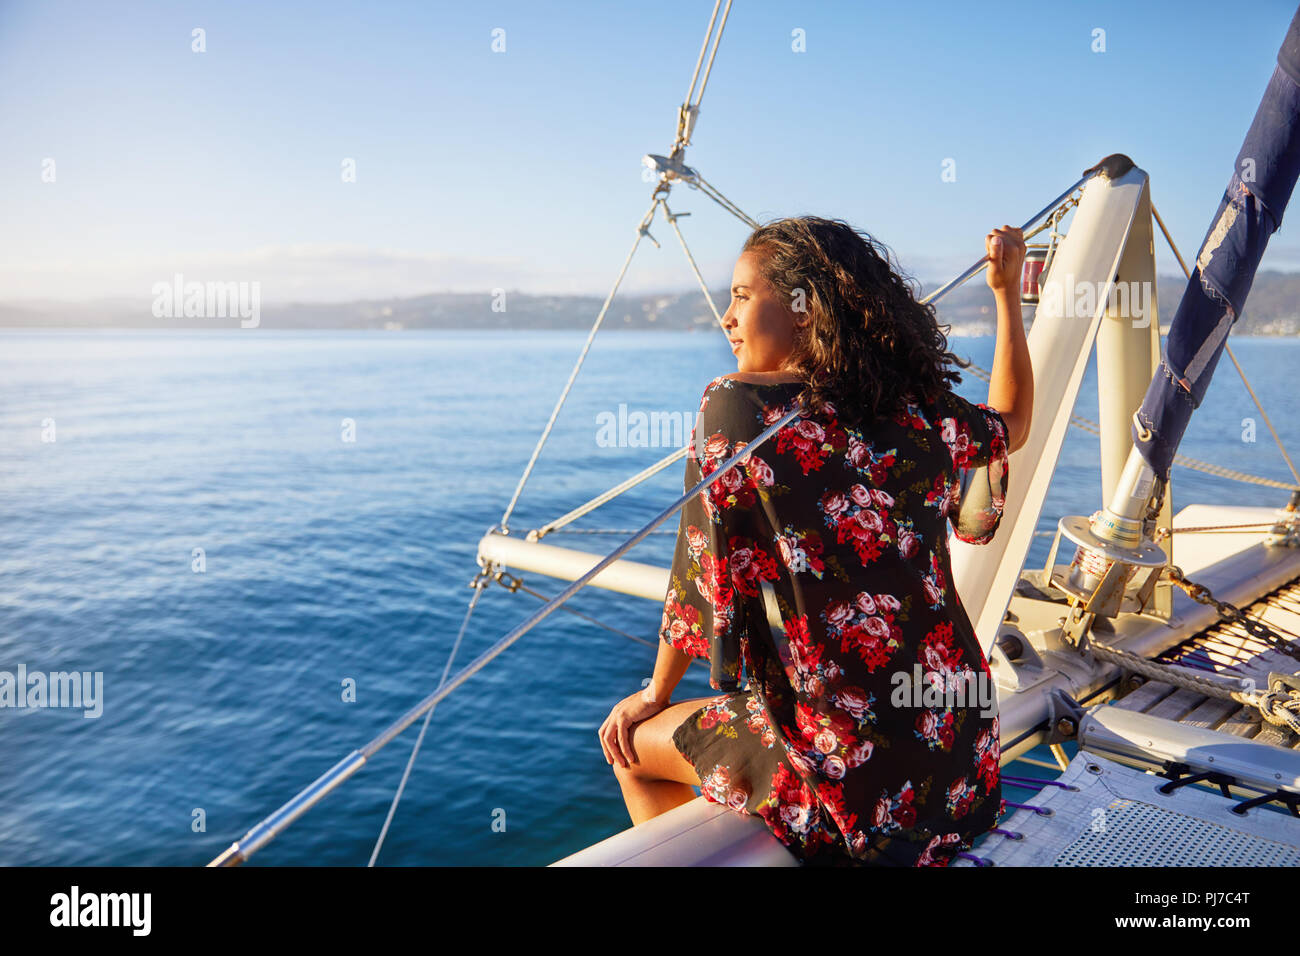 Serene young woman relaxing on sunny catamaran, looking out at blue ocean Stock Photo